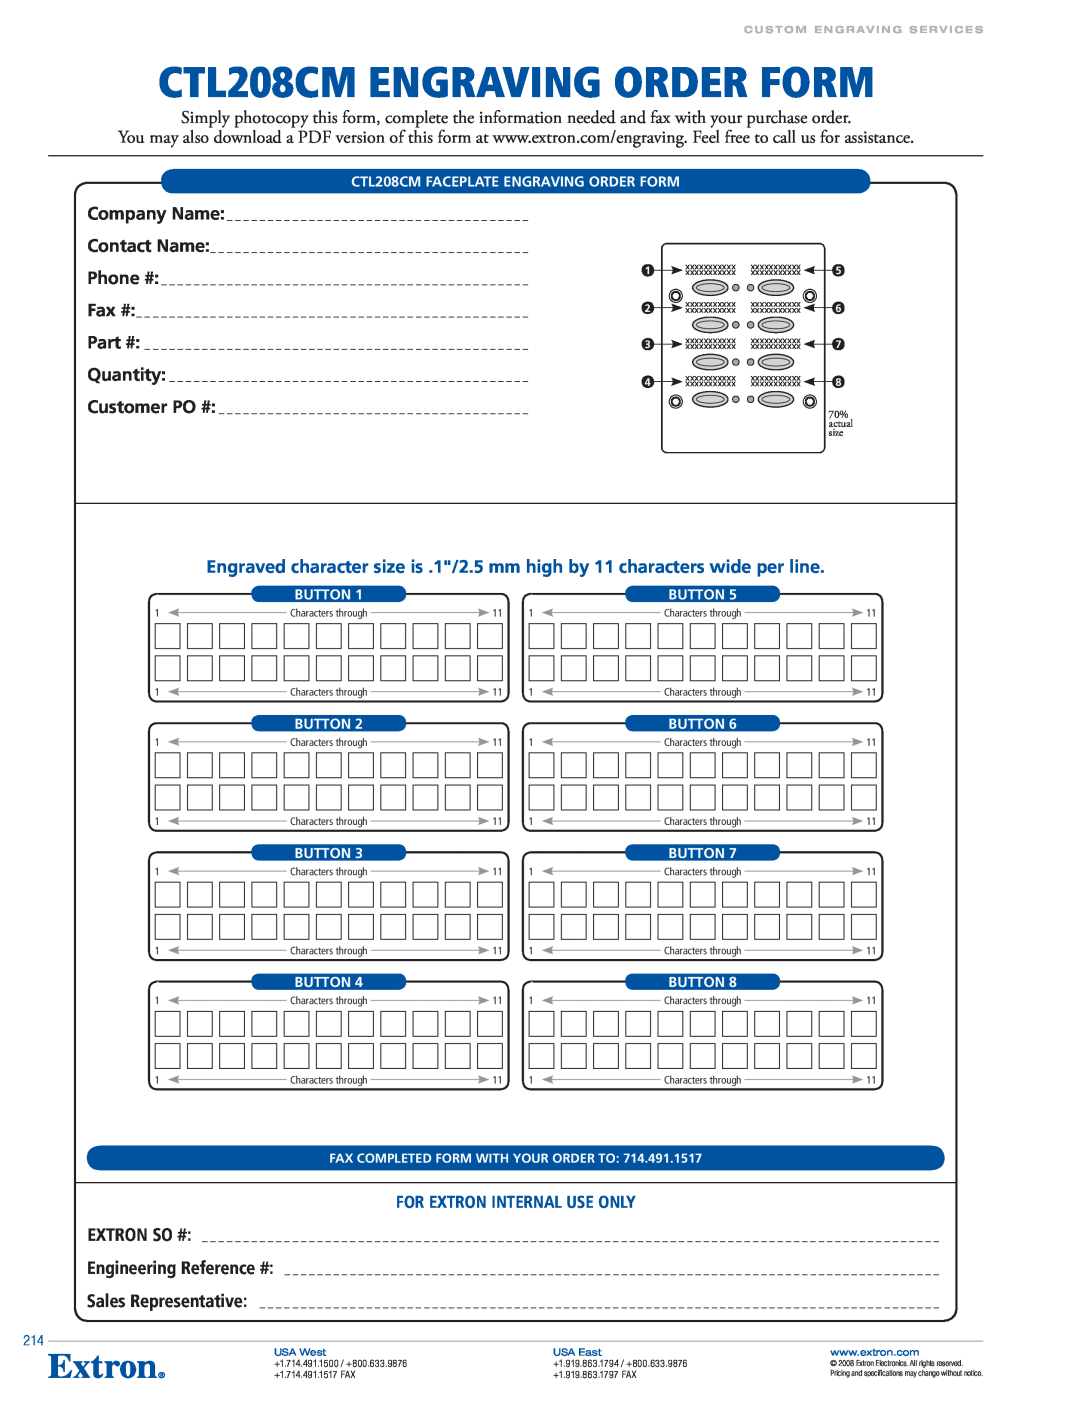 Extron electronic VCM 100 MAAP CTL208CM Engraving Order Form, For Extron Internal use only, Company Name, Contact Name 